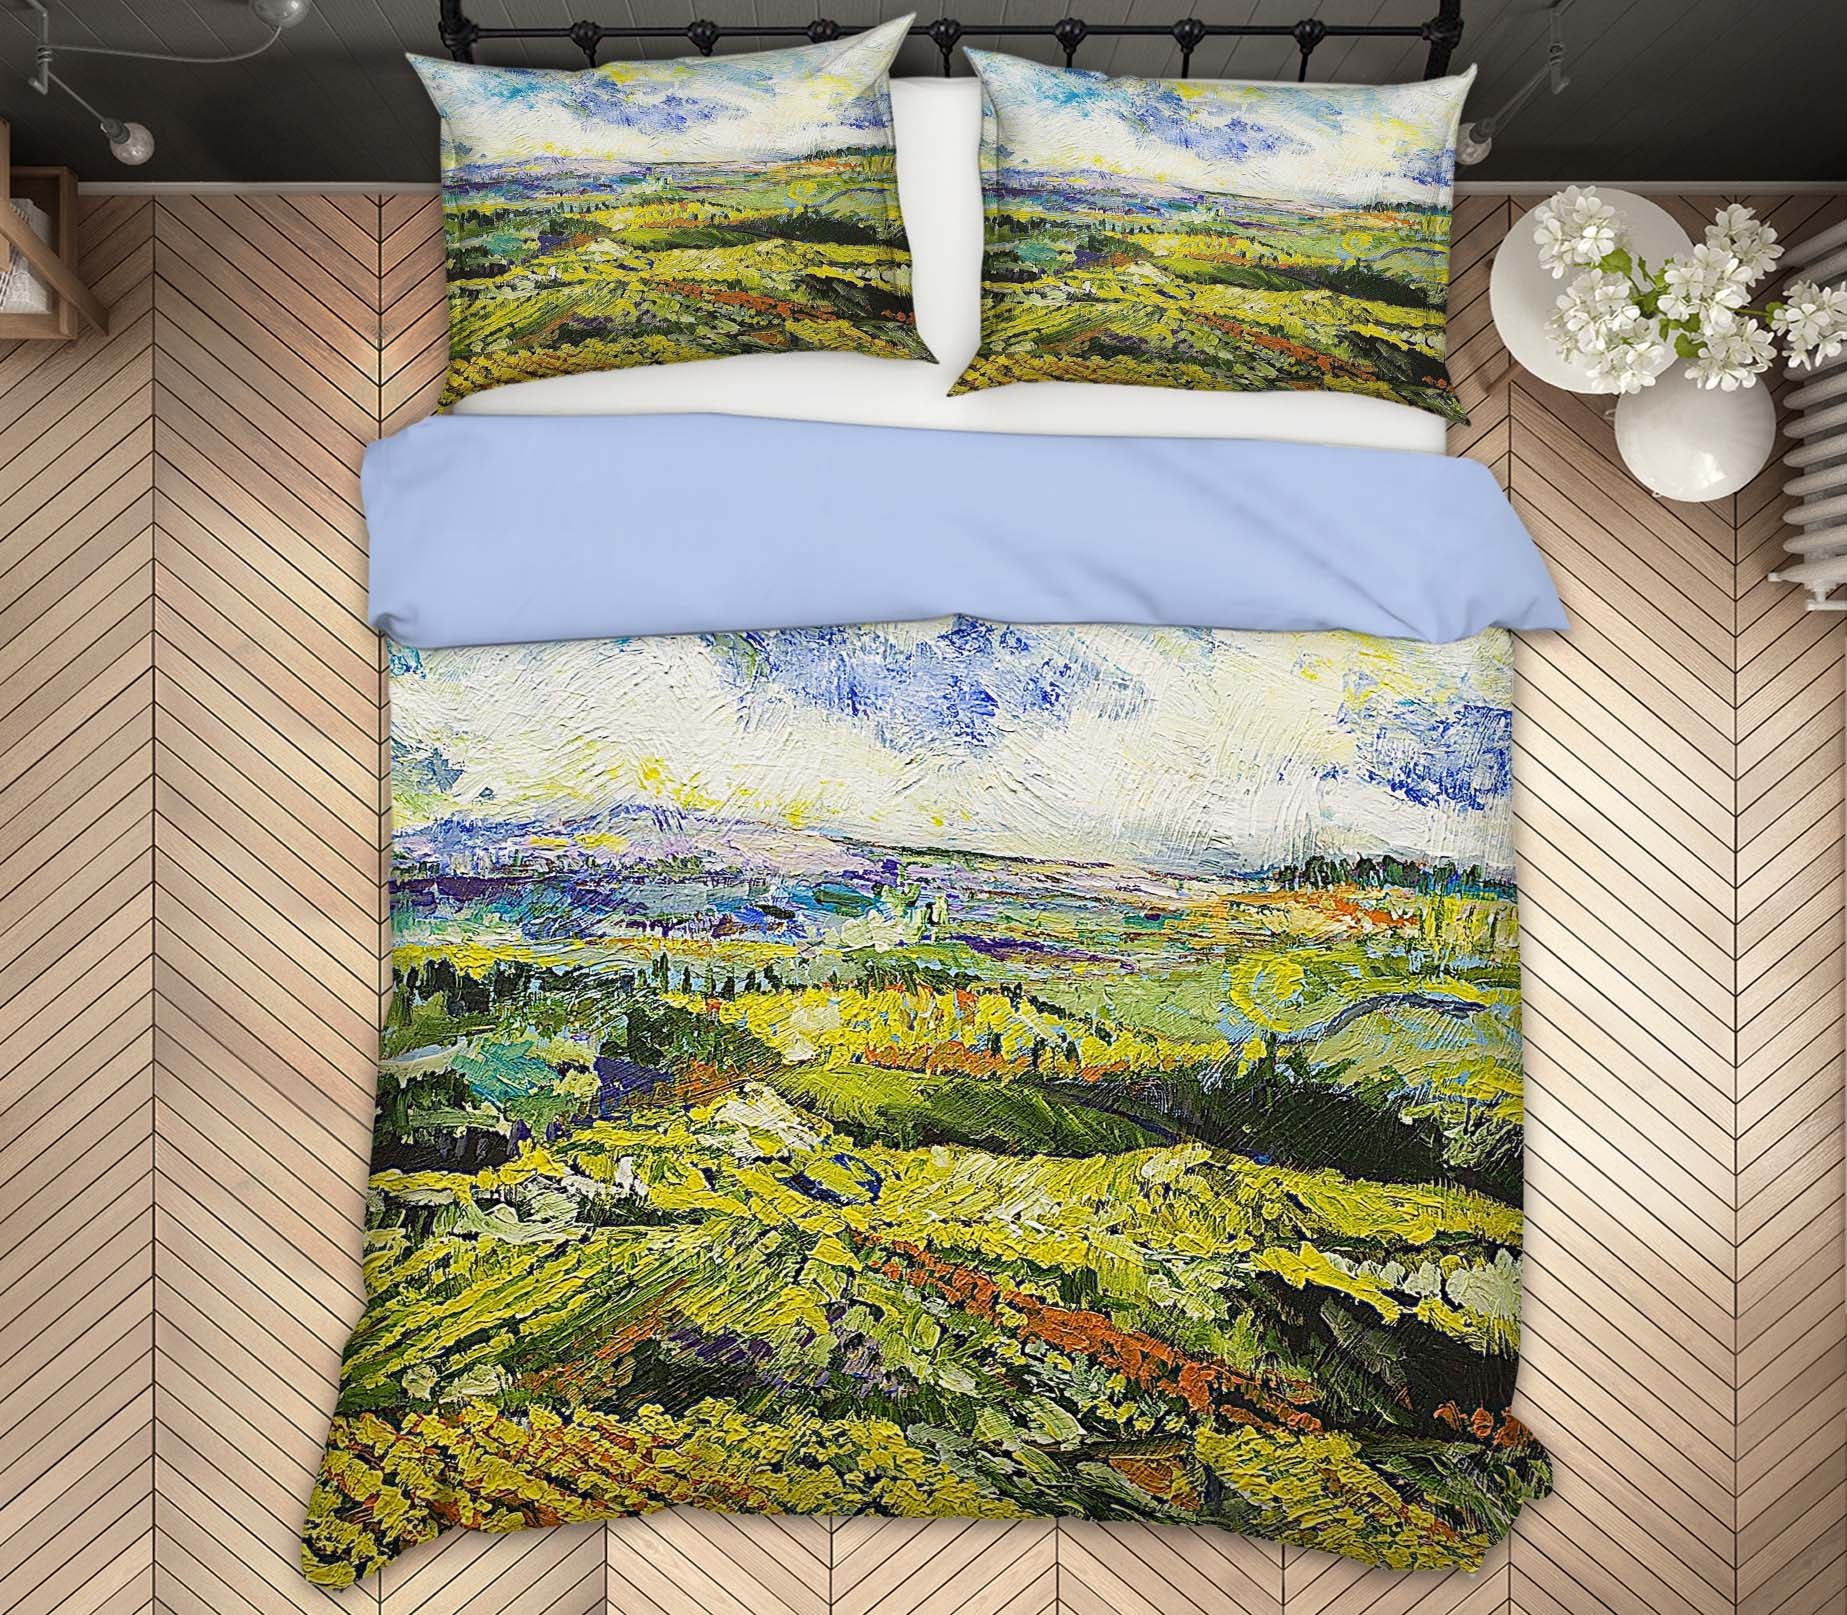 3D Picturesque Countryside 2115 Allan P. Friedlander Bedding Bed Pillowcases Quilt